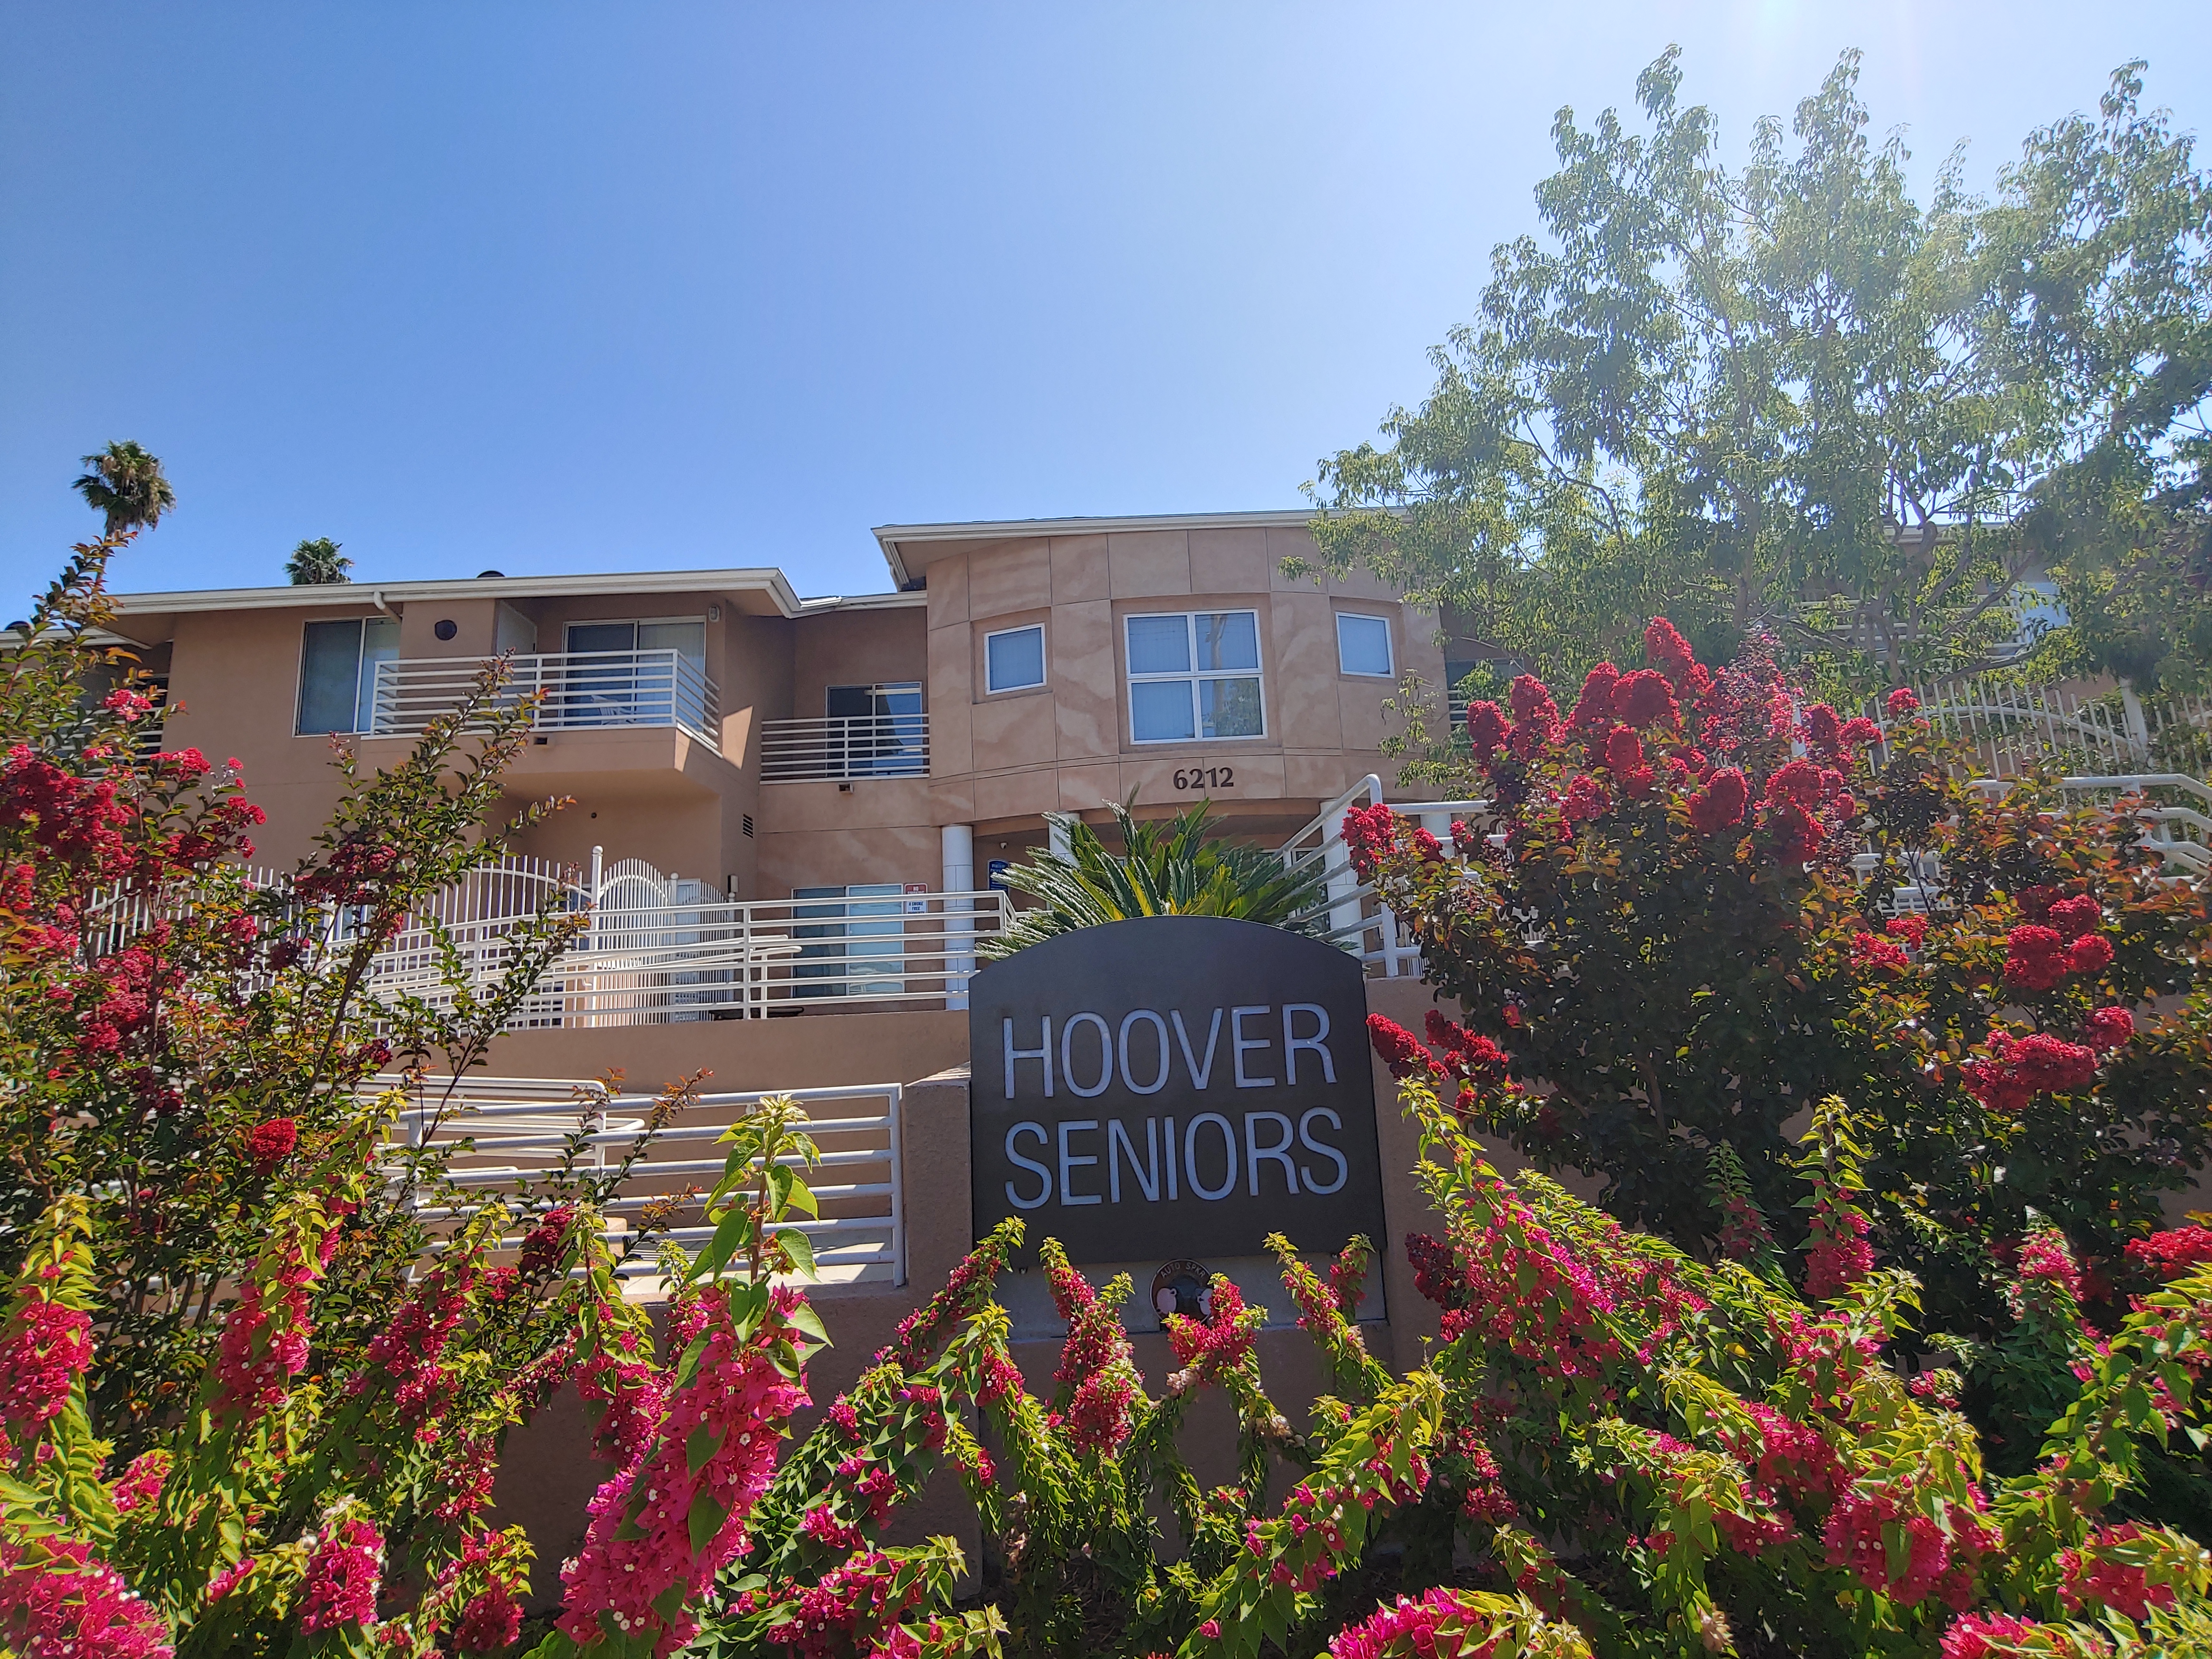 View of front side of building. Large sign of building name Hoover Seniors. Accessibility ramp leading up to front of two story building. Large flower bed decorating front of building.